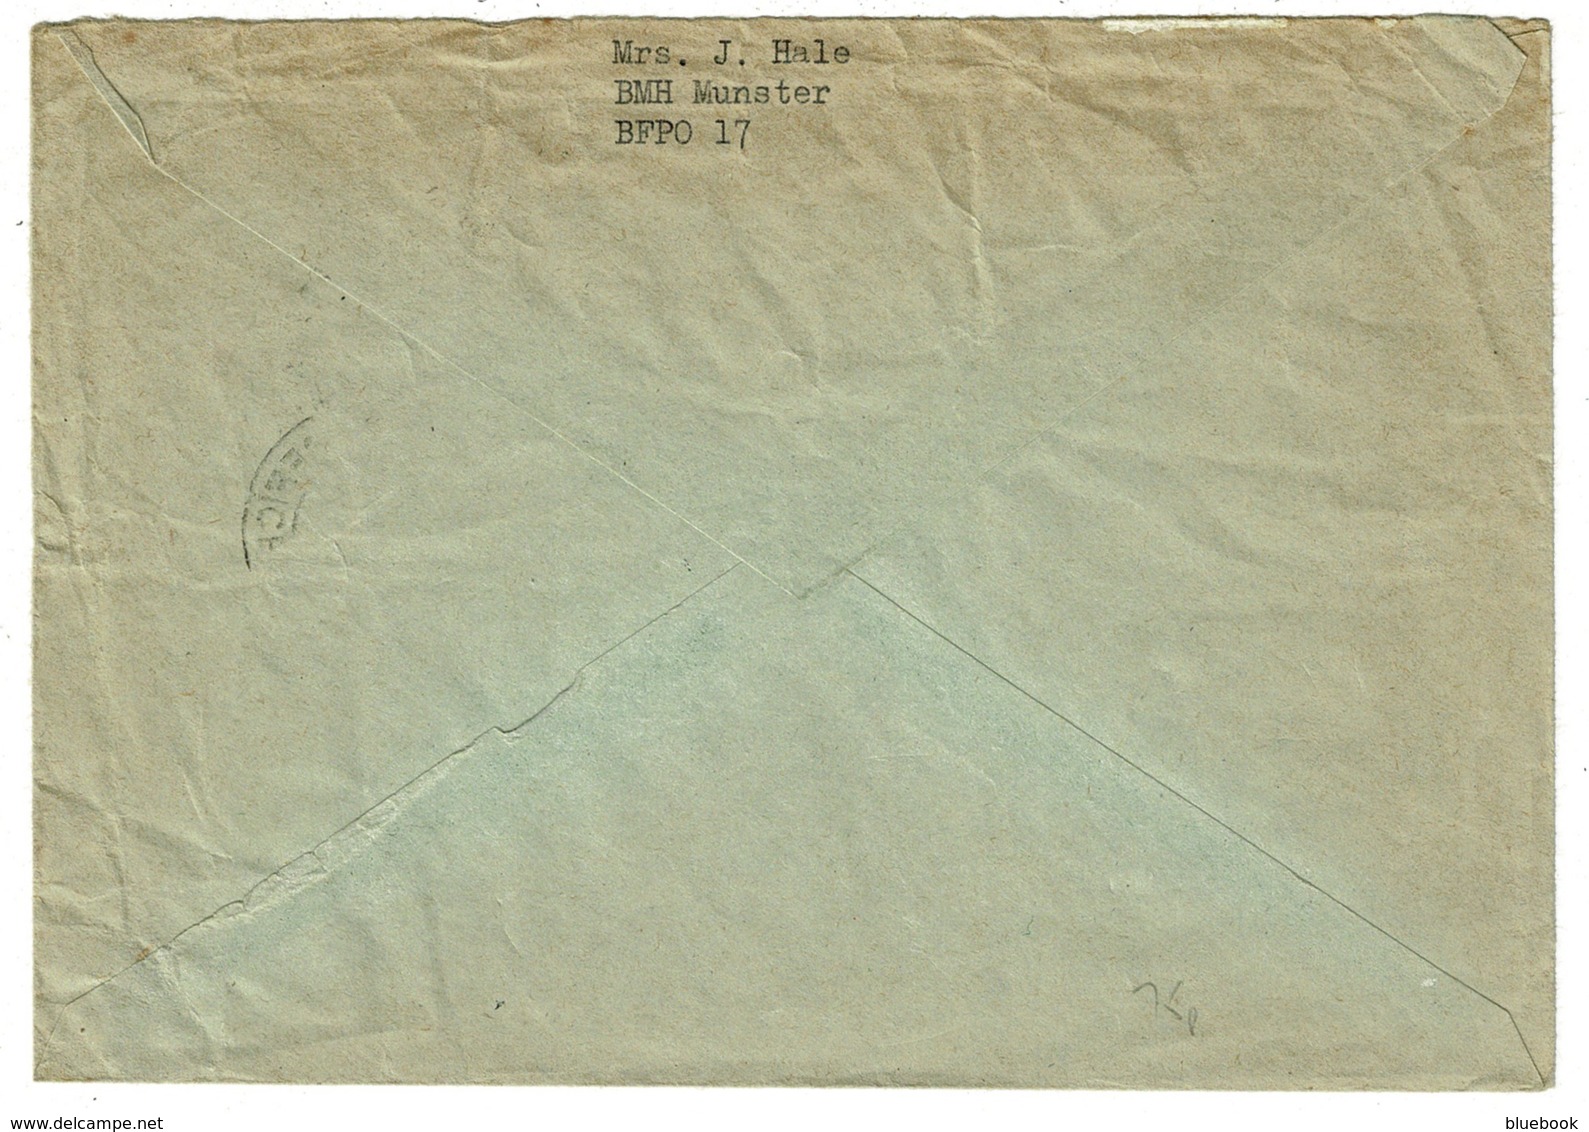 Ref 1332 - 1965 GB Military Cover - Field Post Office FPO 223 - BMH Munster BFPO 17 Germany - Covers & Documents